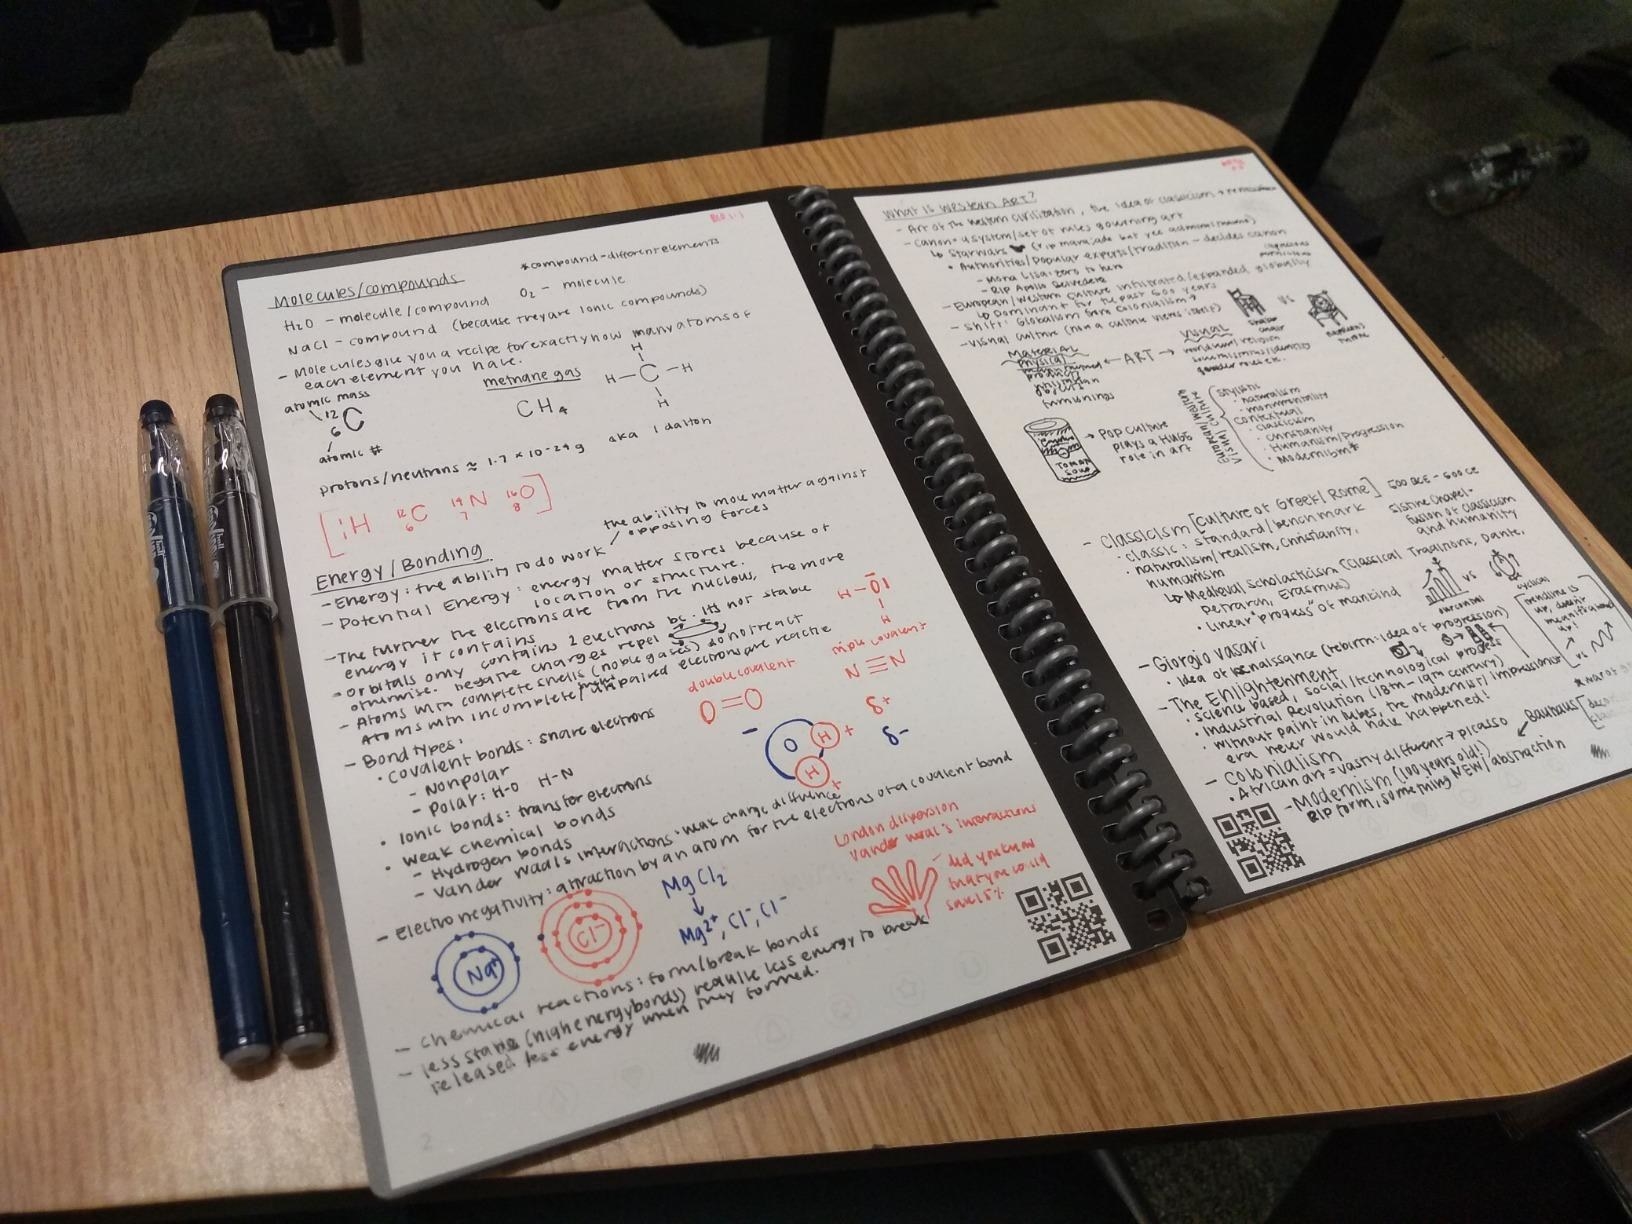 Reviewer pic of the notebook open on a desk with notes neatly written on either side and two pens sitting next to it